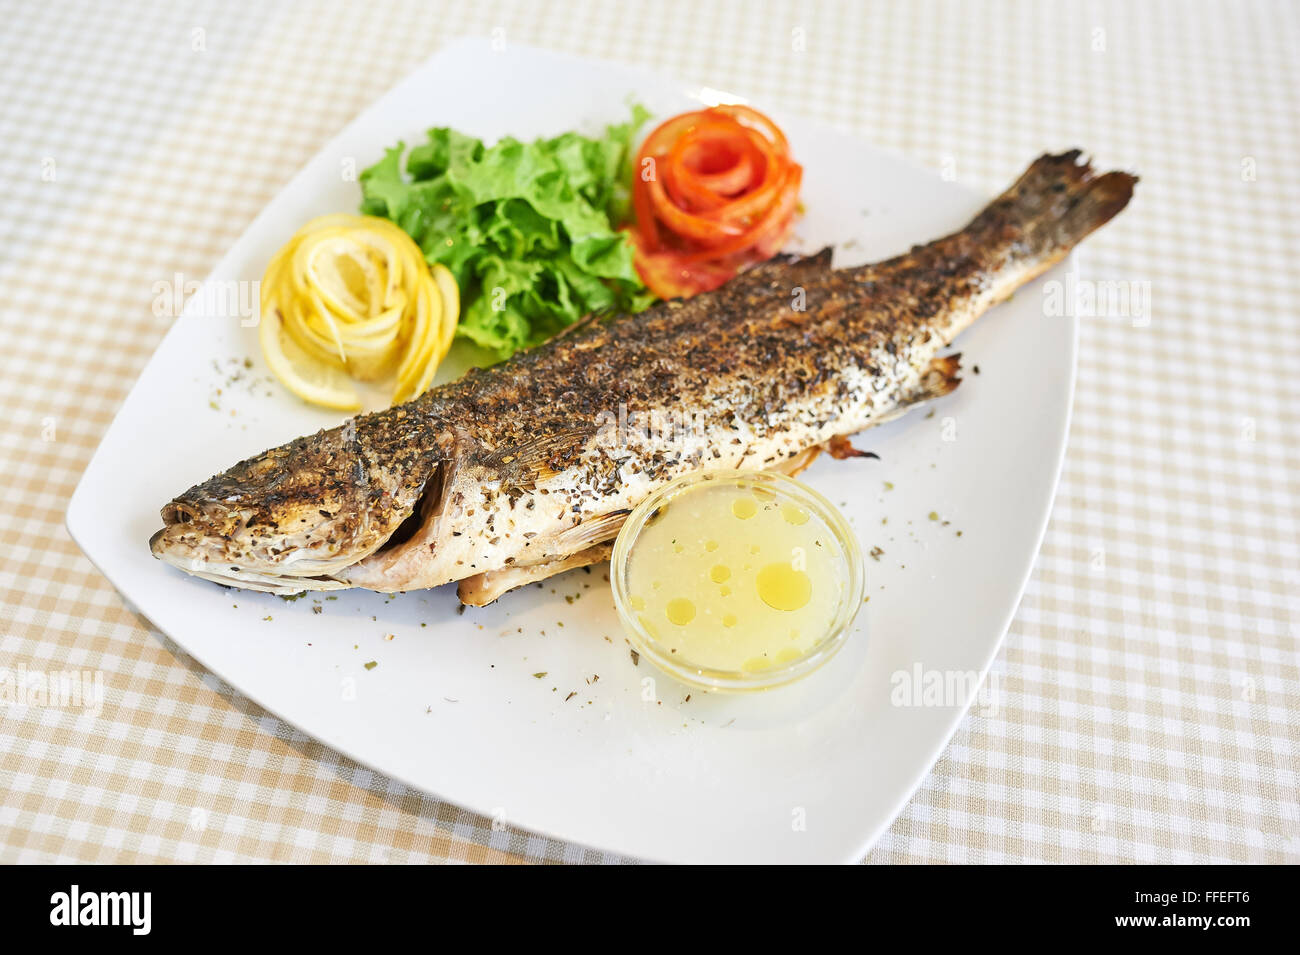 fried baked fish at a restaurant on white plate Stock Photo